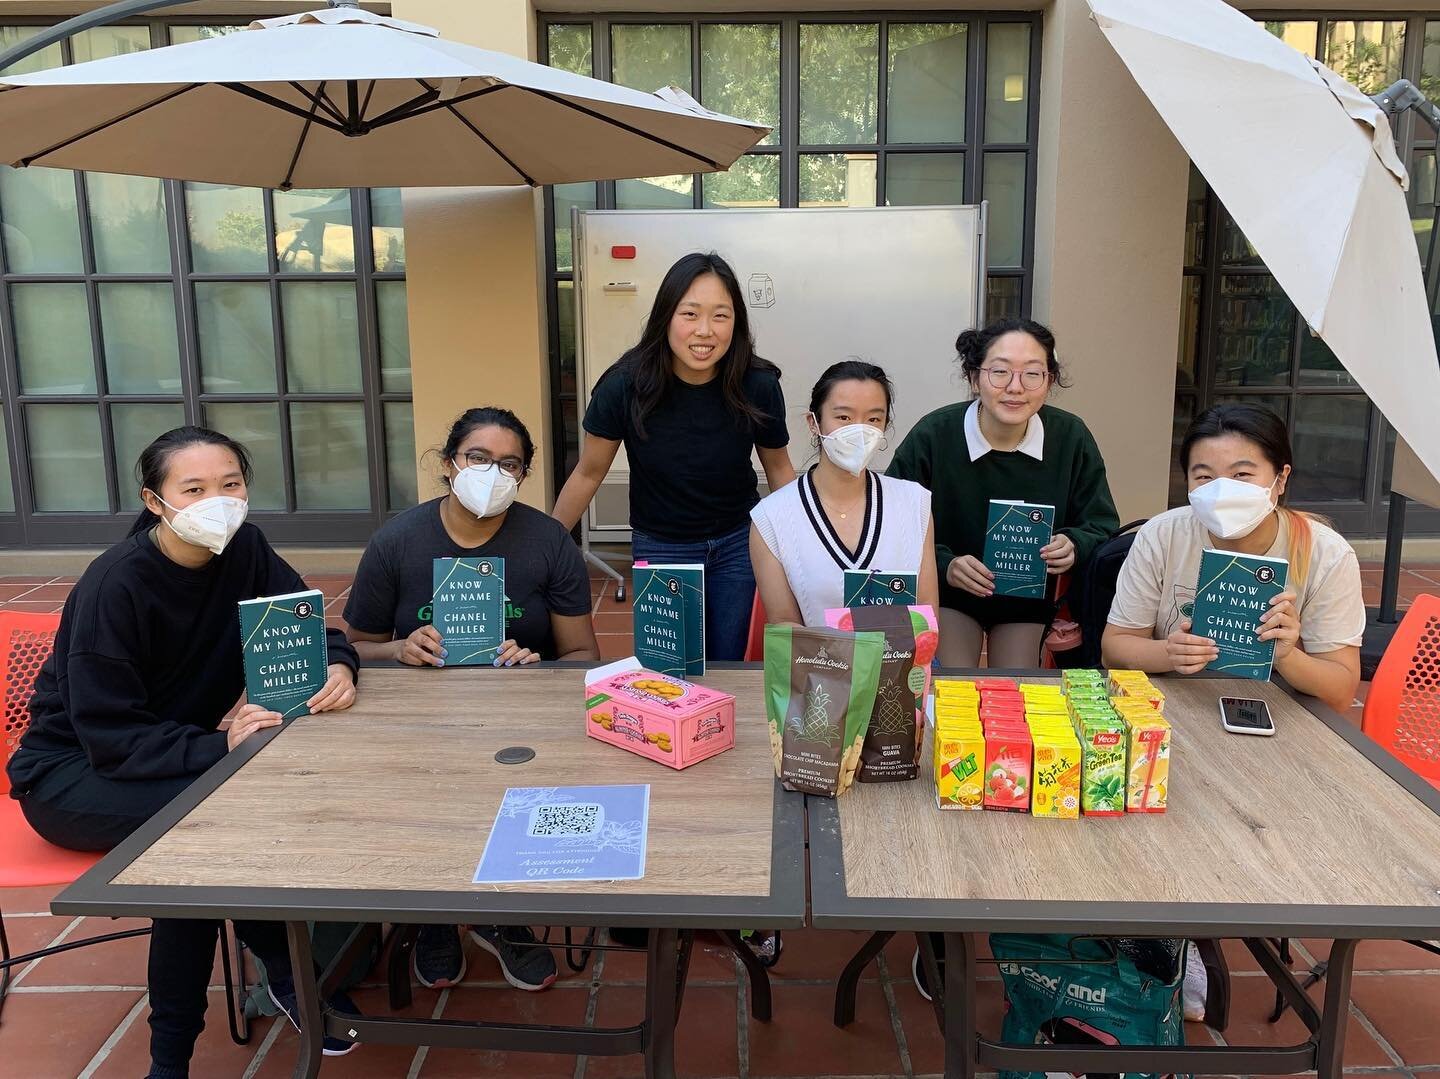 We had a wonderful book club discussion yesterday! In honor of Sexual Assault Awareness Month and AAPI Heritage Month, we&rsquo;re reading &ldquo;Know My Name&rdquo; by the brilliant @chanel_miller .

Thank you to @belcantobooks for our books! They&r